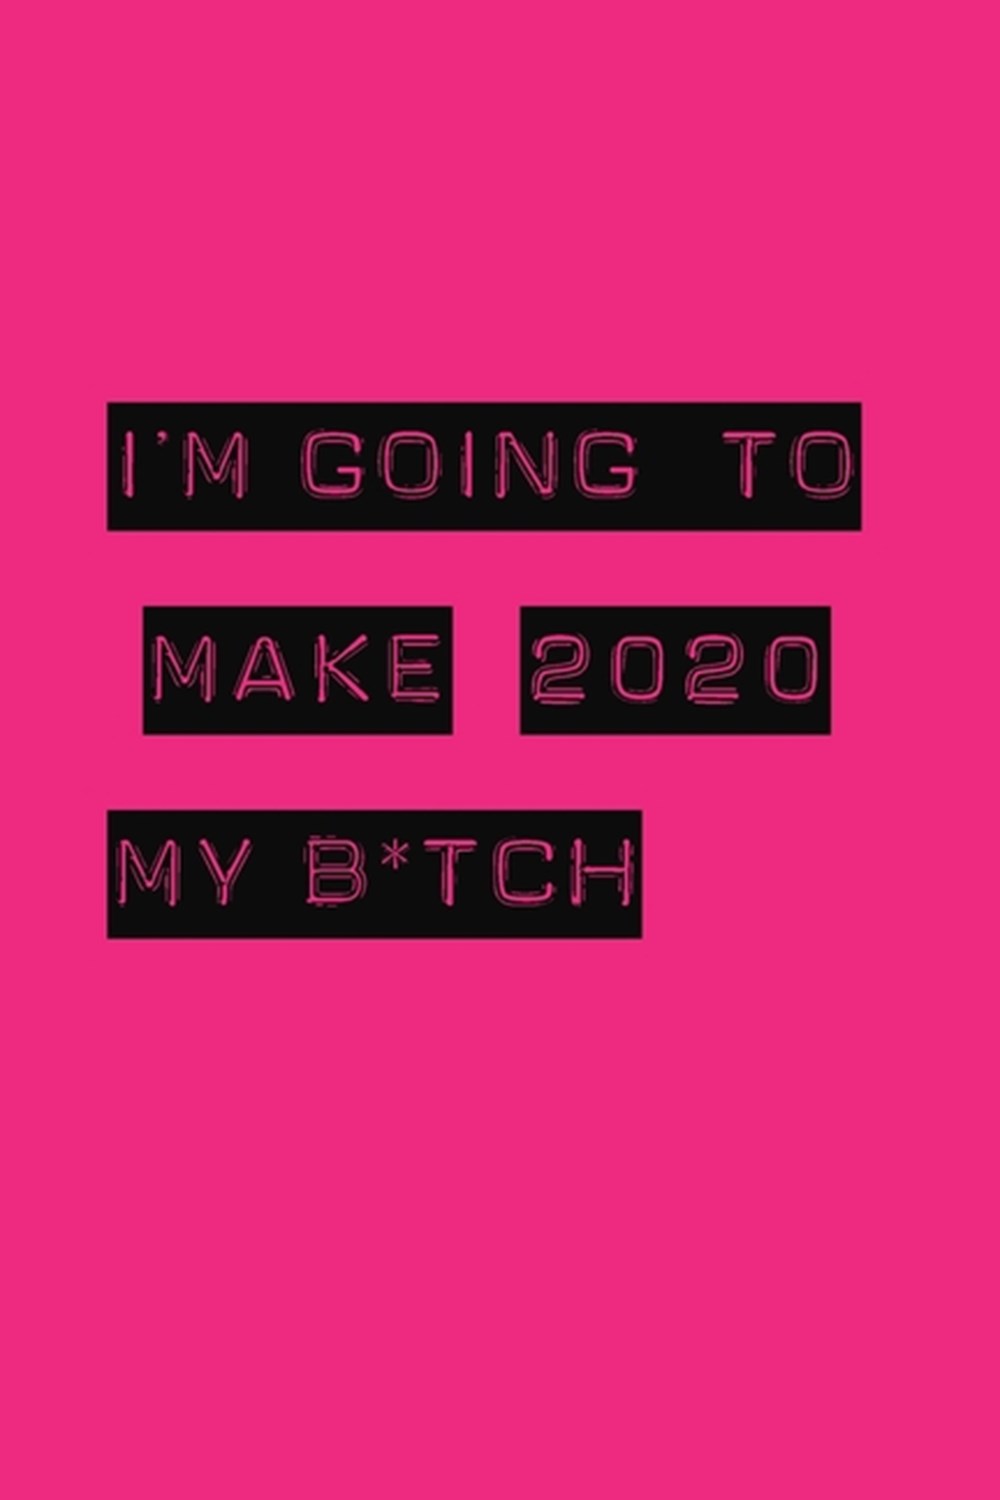 I'm Going to Make 2020 My B*tch: Weekly + Monthly View Planner - Motivational Quote - 6x9 in - 2020 